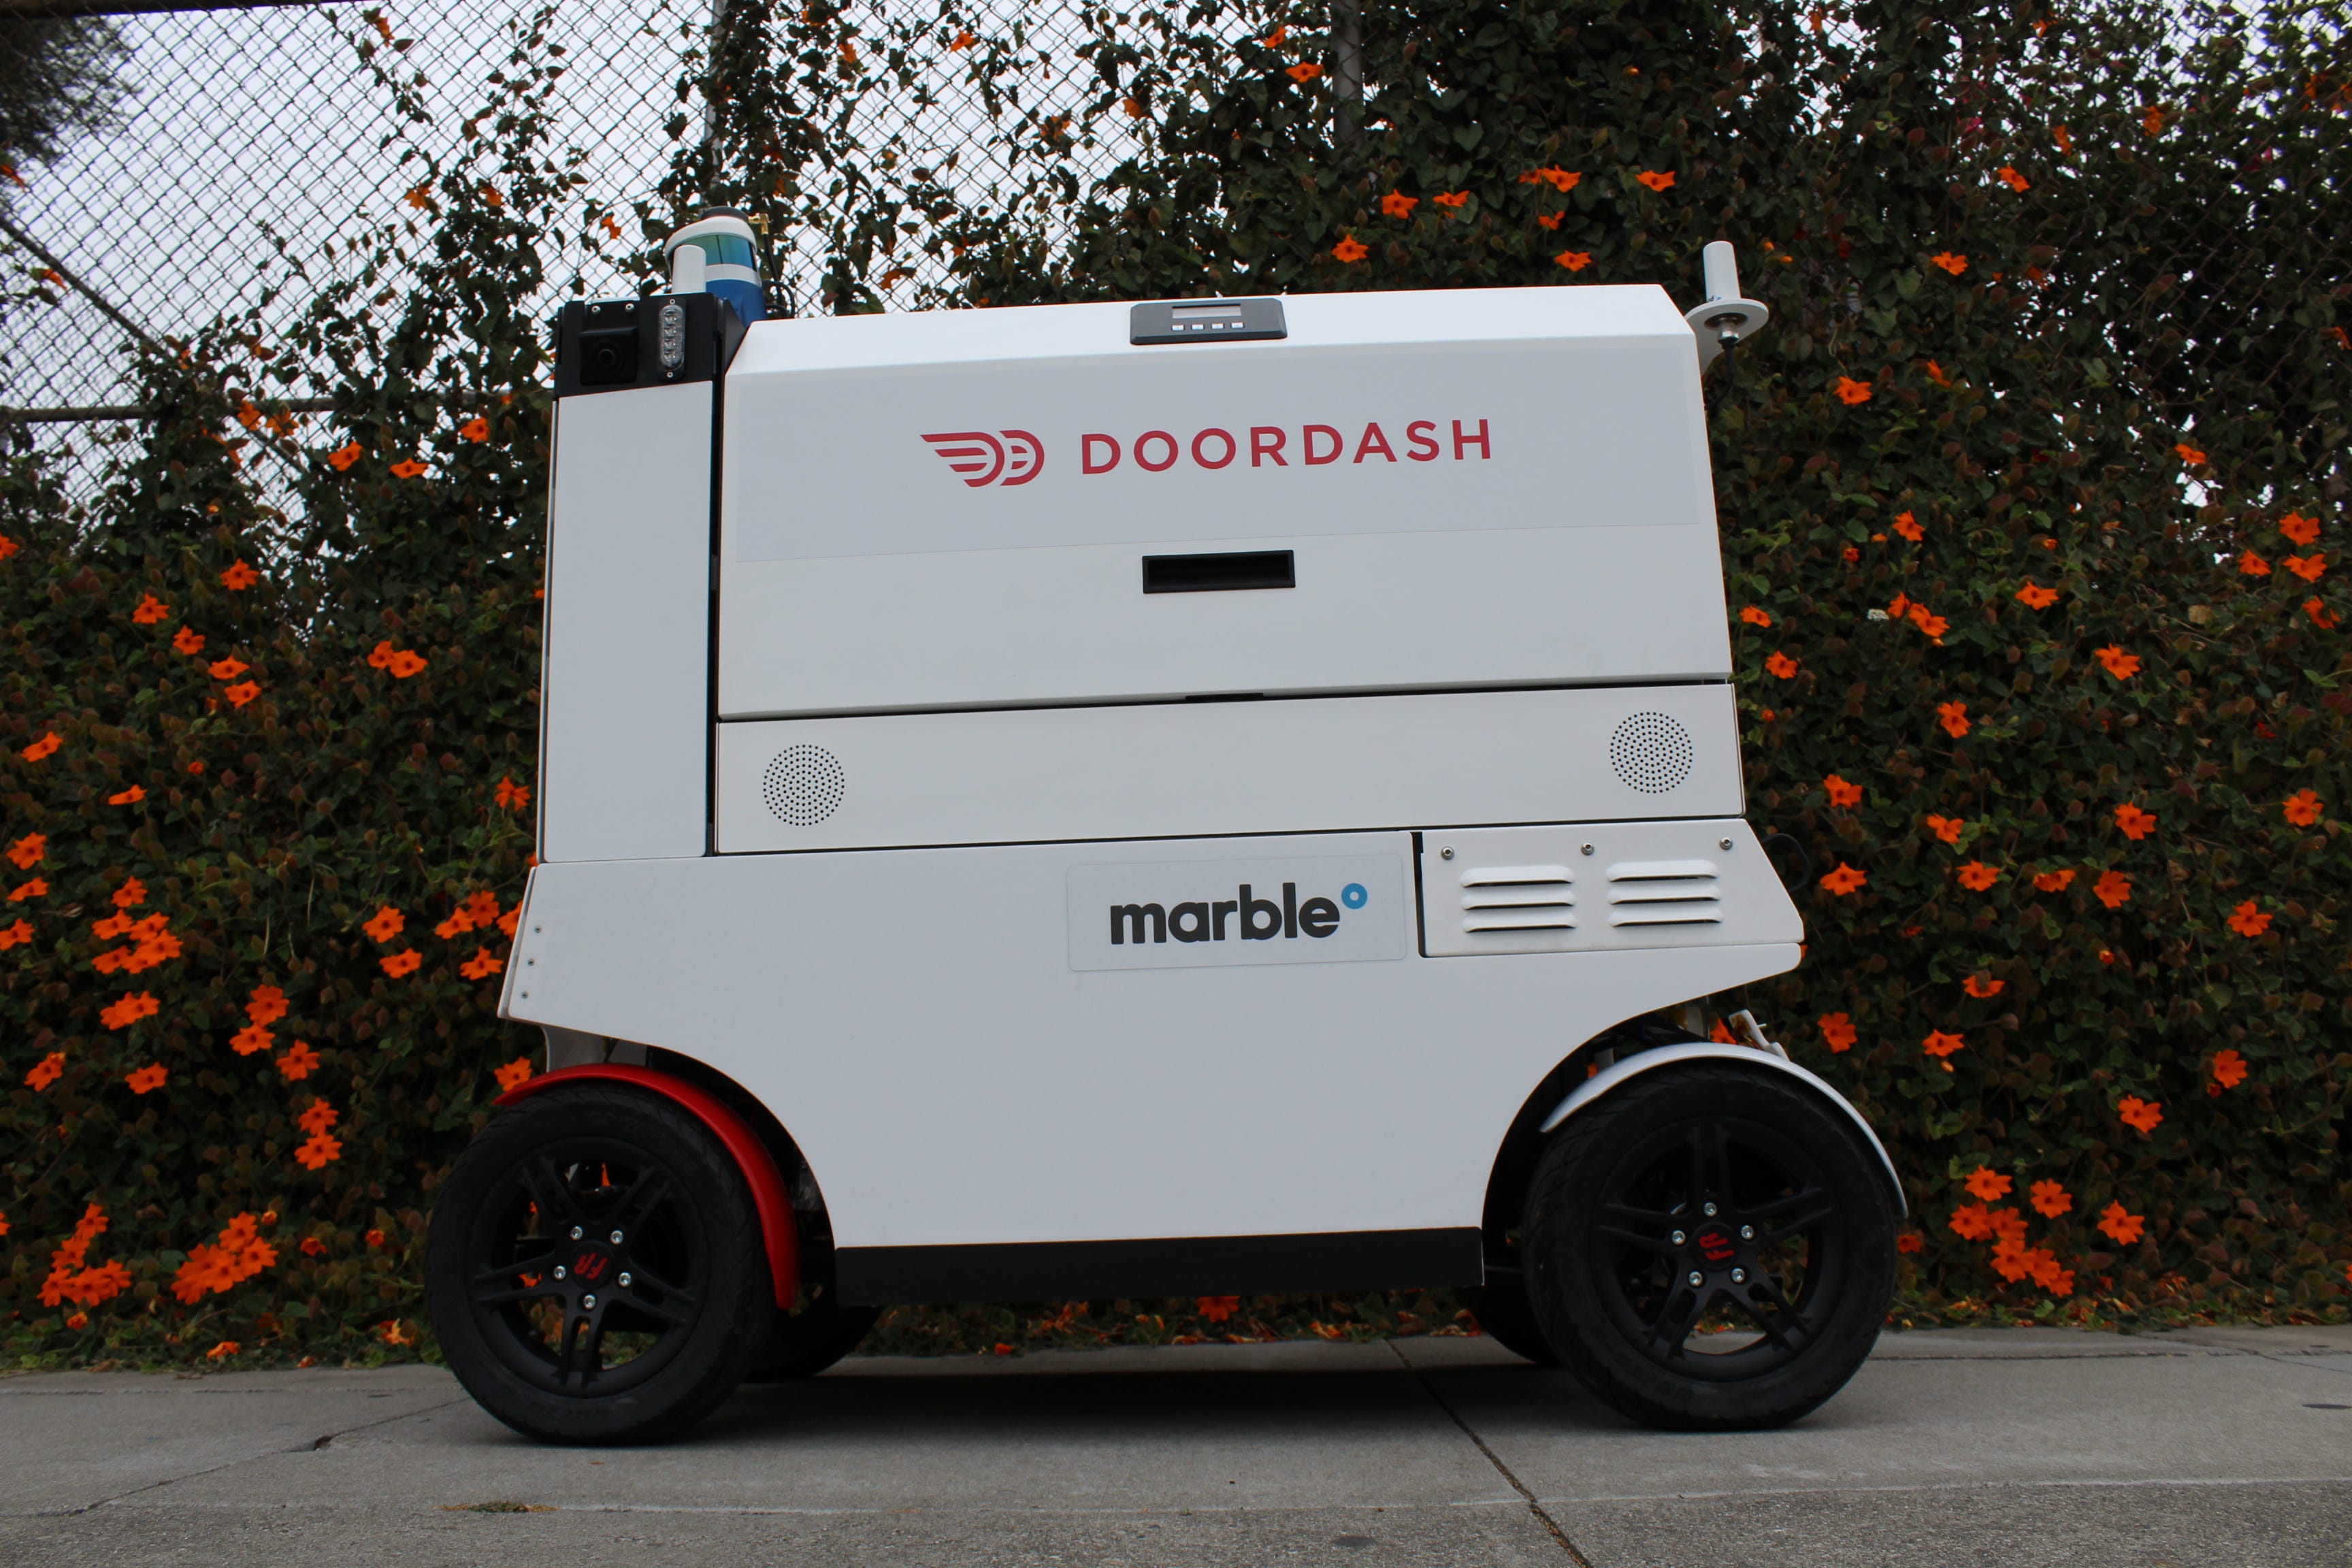 lag At regere succes Welcoming our Newest Robots to the DoorDash Fleet with Marble | by DoorDash  | Medium